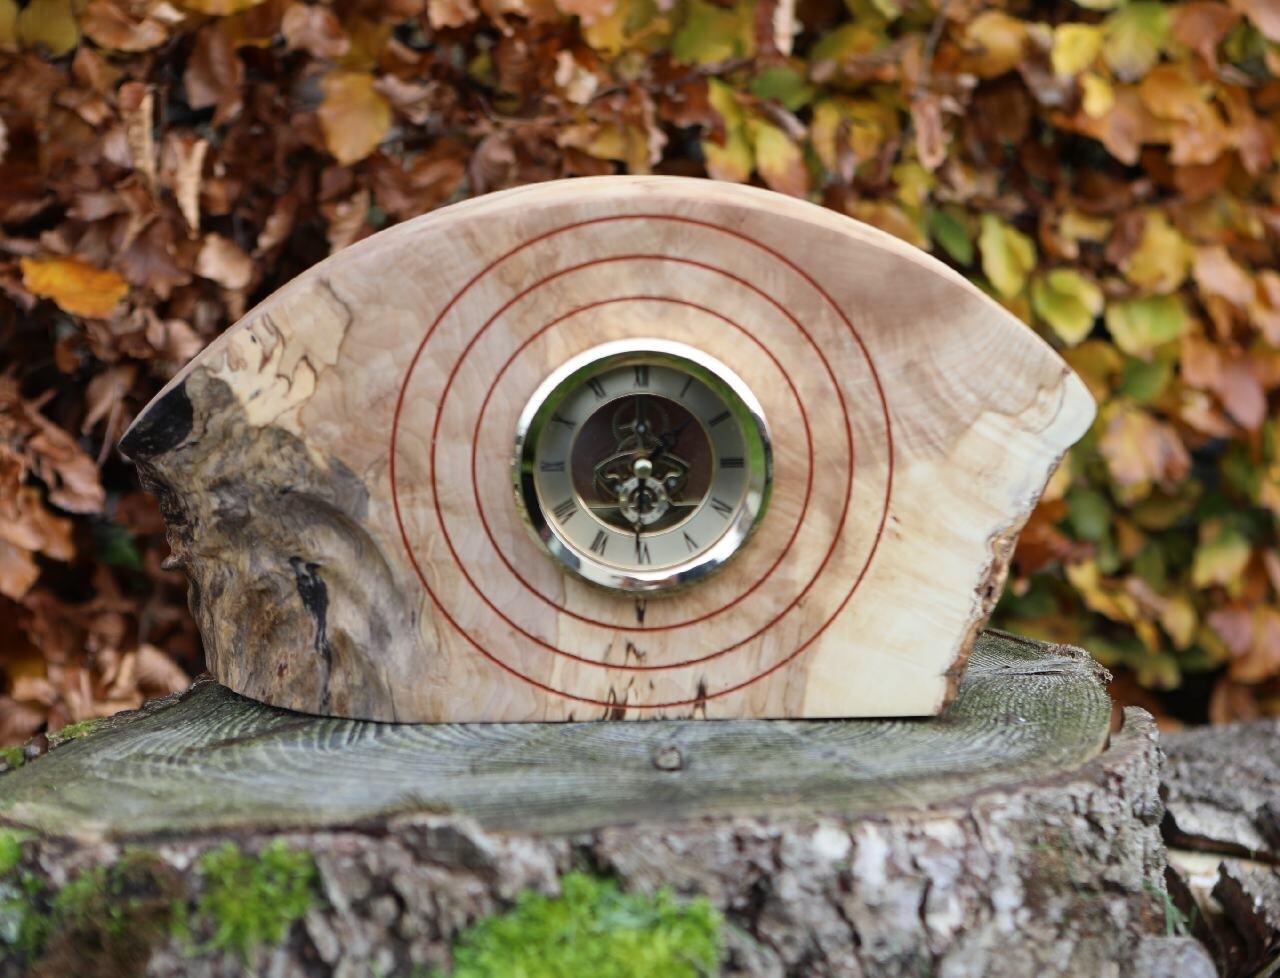 Live Edge Spalted Burl Sycamore Mantel Clock